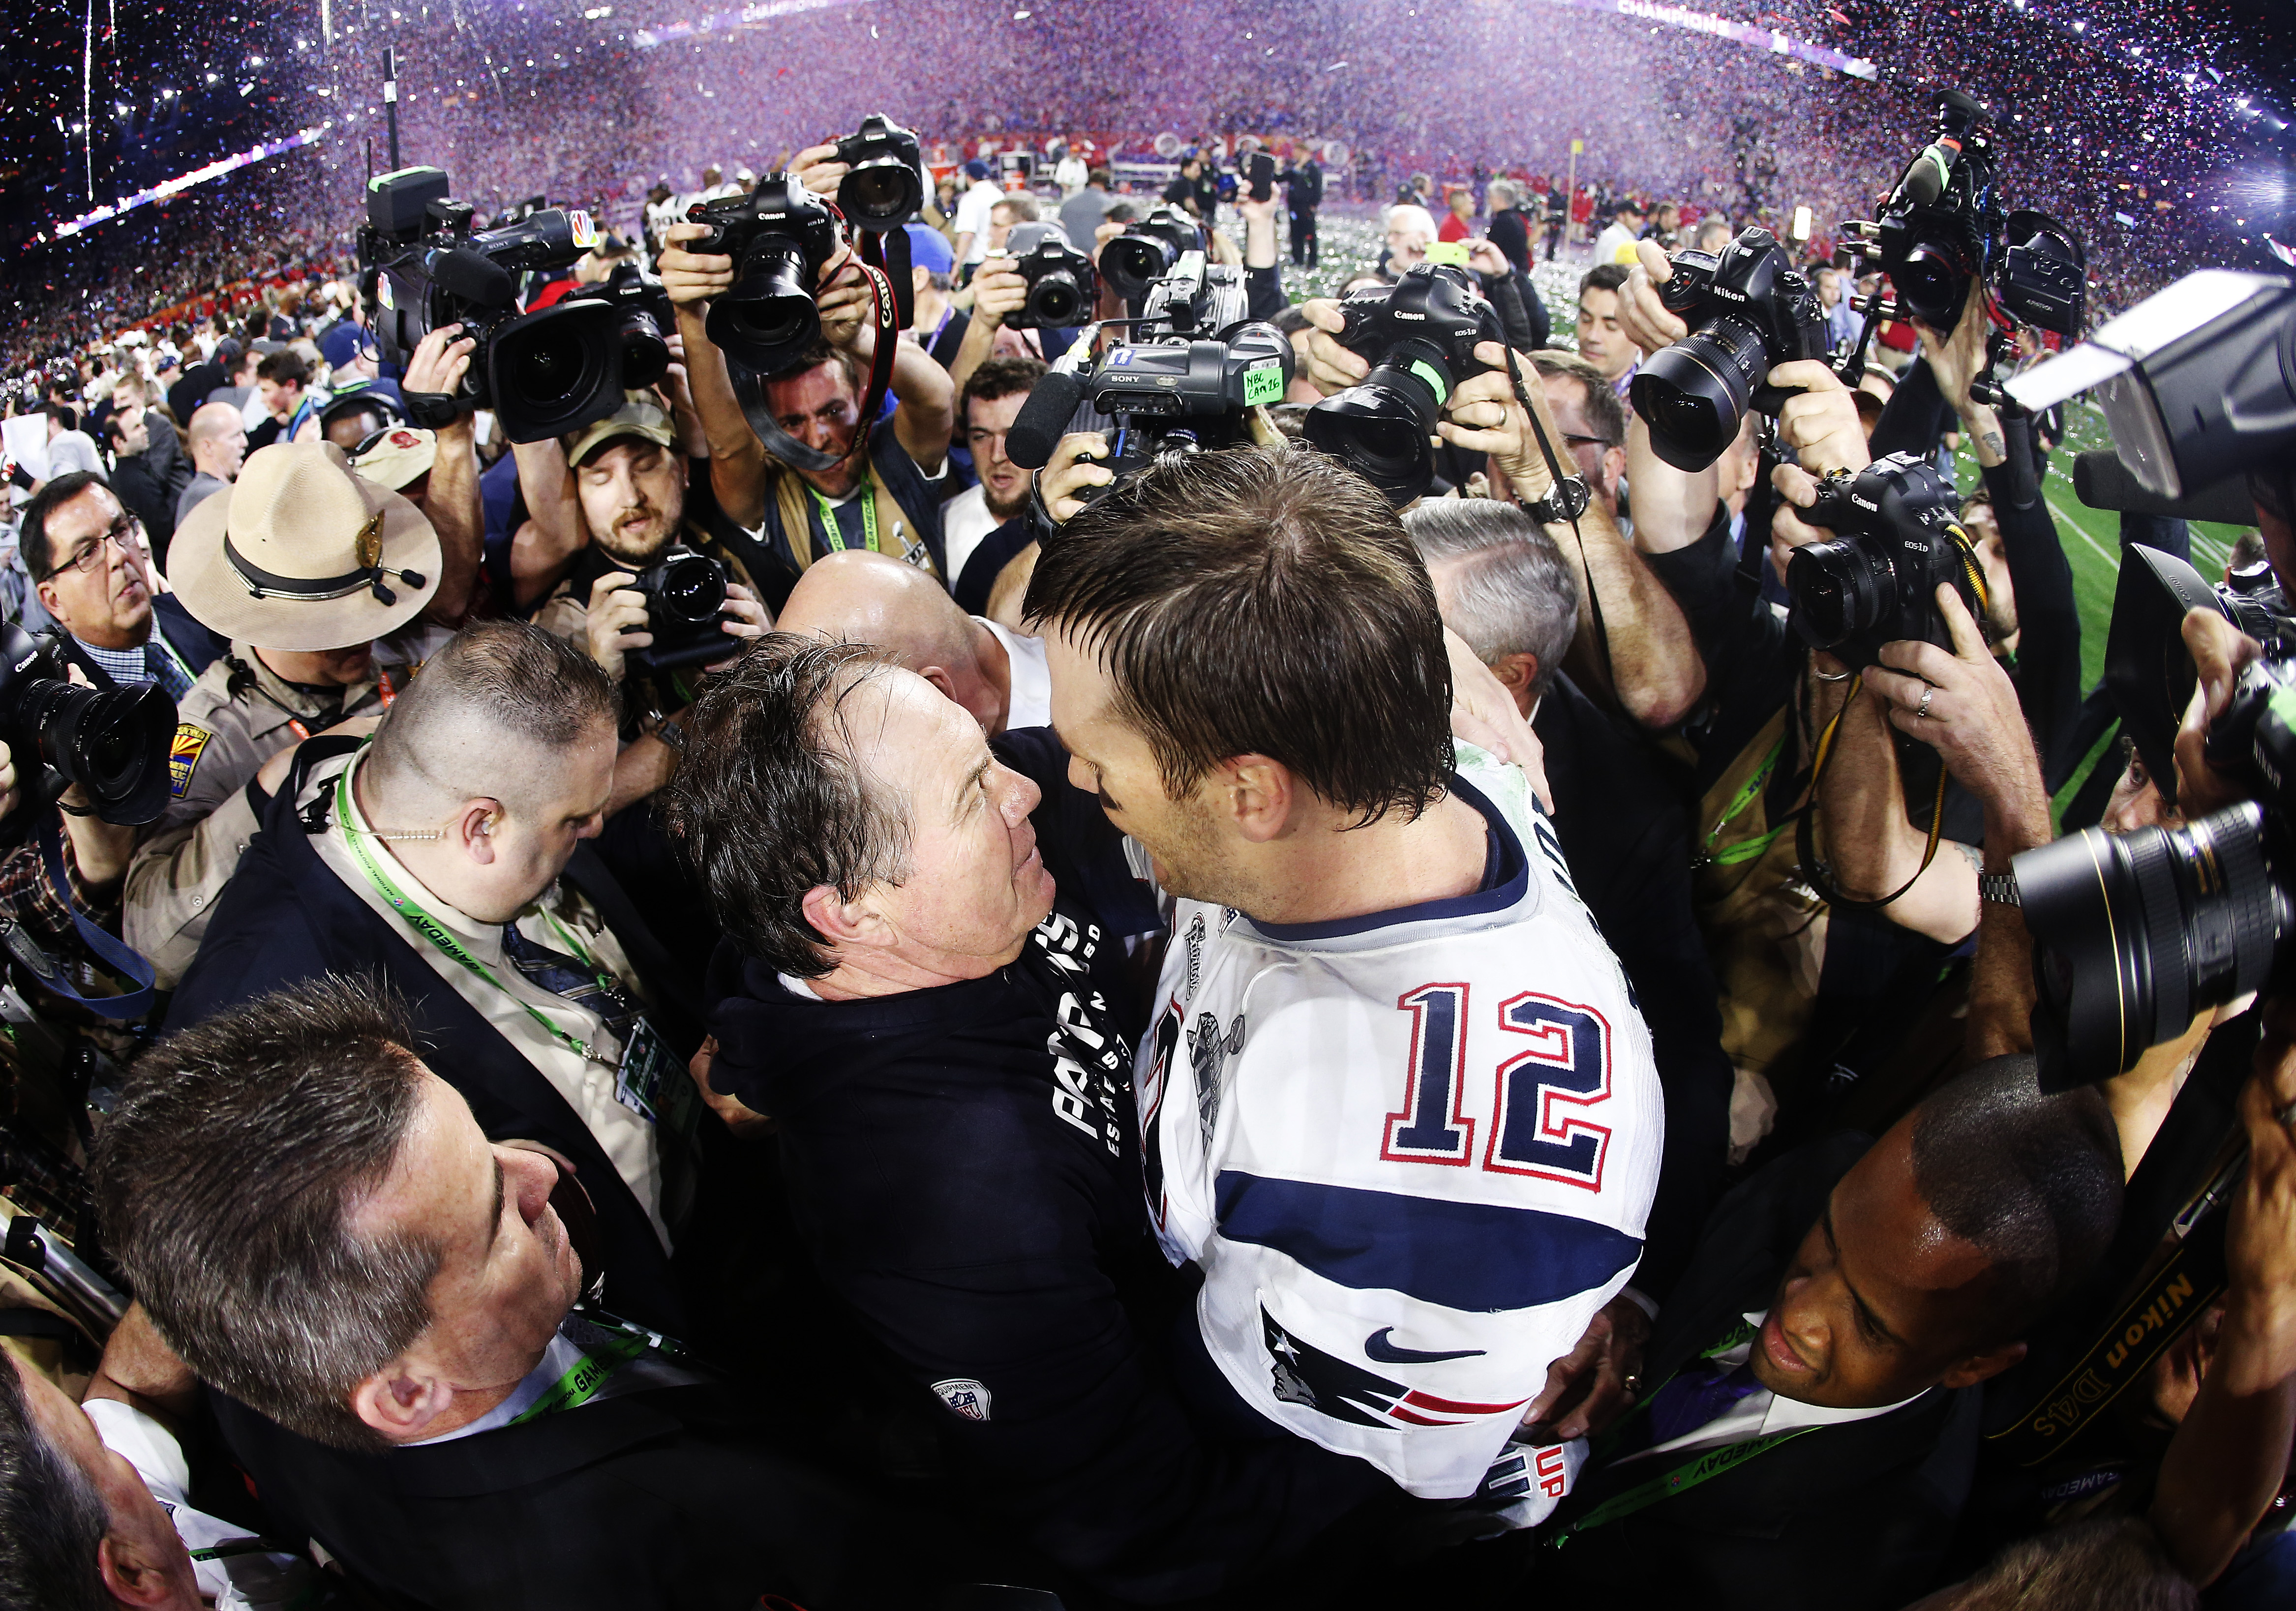 Tom Brady #12 of the New England Patriots celebrates with head coach Bill Belichick after defeating the Seattle Seahawks 28-24 during Super Bowl XLIX at University of Phoenix Stadium on February 1, 2015 in Glendale, Arizona.  (Photo by Christian Petersen/Getty Images)